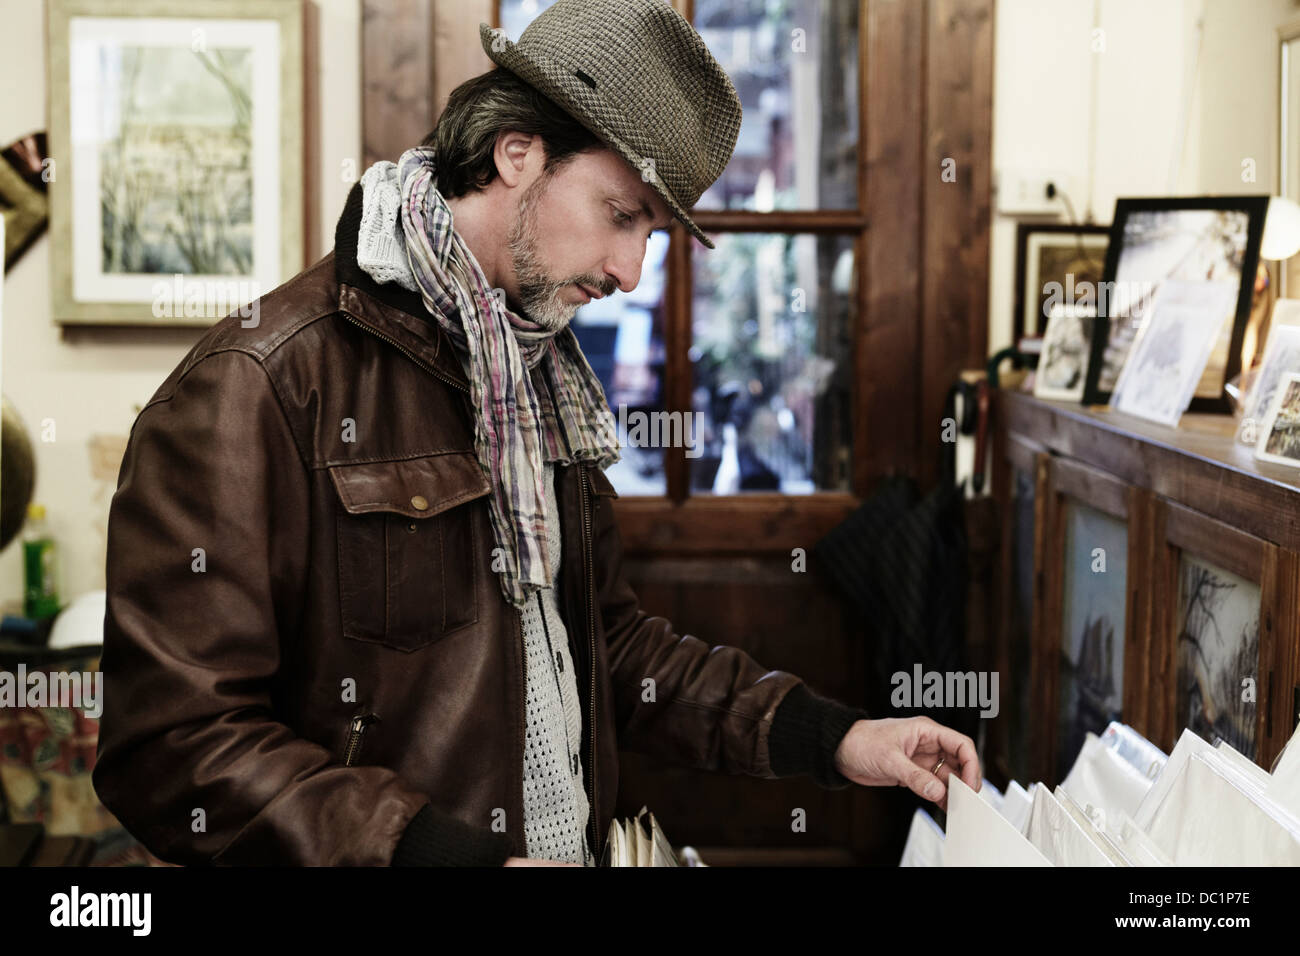 Mid adult man browsing in antique shop Stock Photo